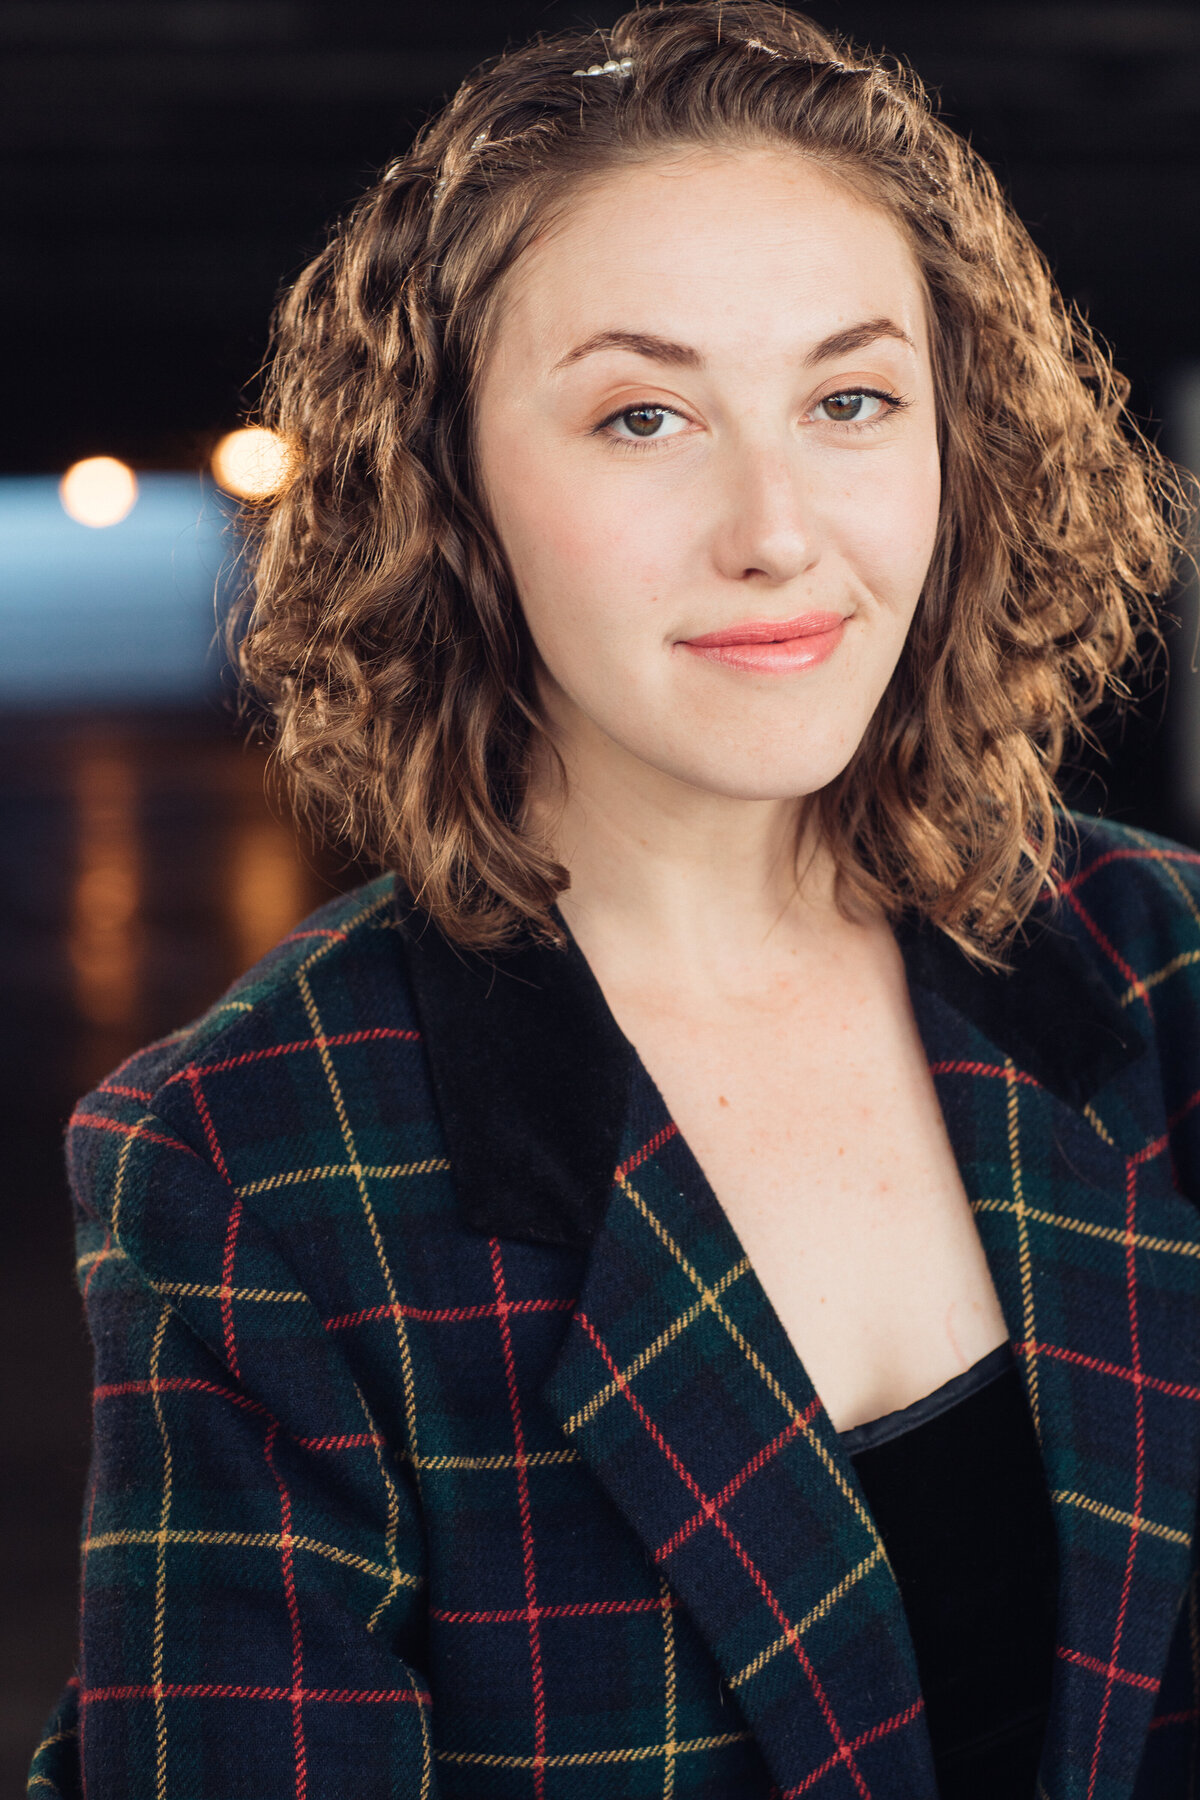 Headshot Photograph Of Young Woman In Outer Black Checkered Blazer And Inner Black Blouse Los Angeles